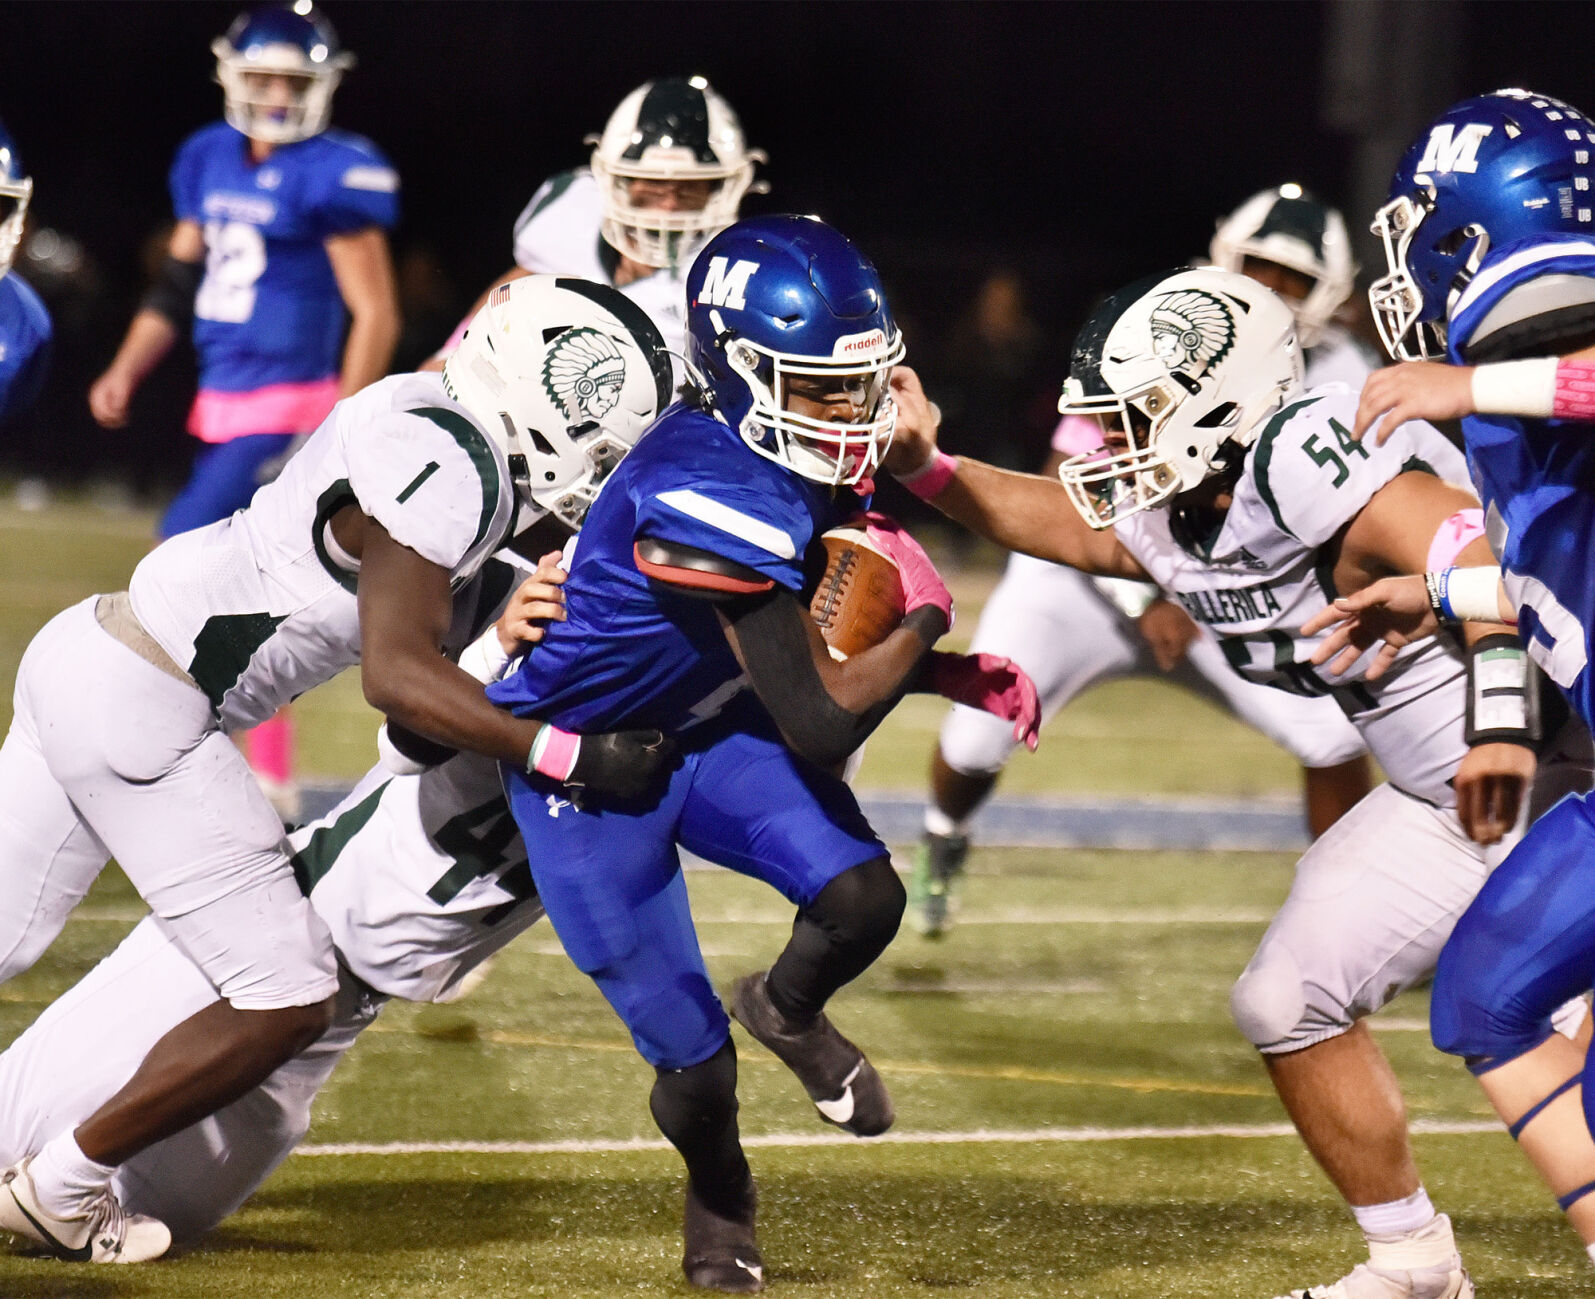 Methuen looks to bounce back after loss to Billerica and secure win against Tewksbury